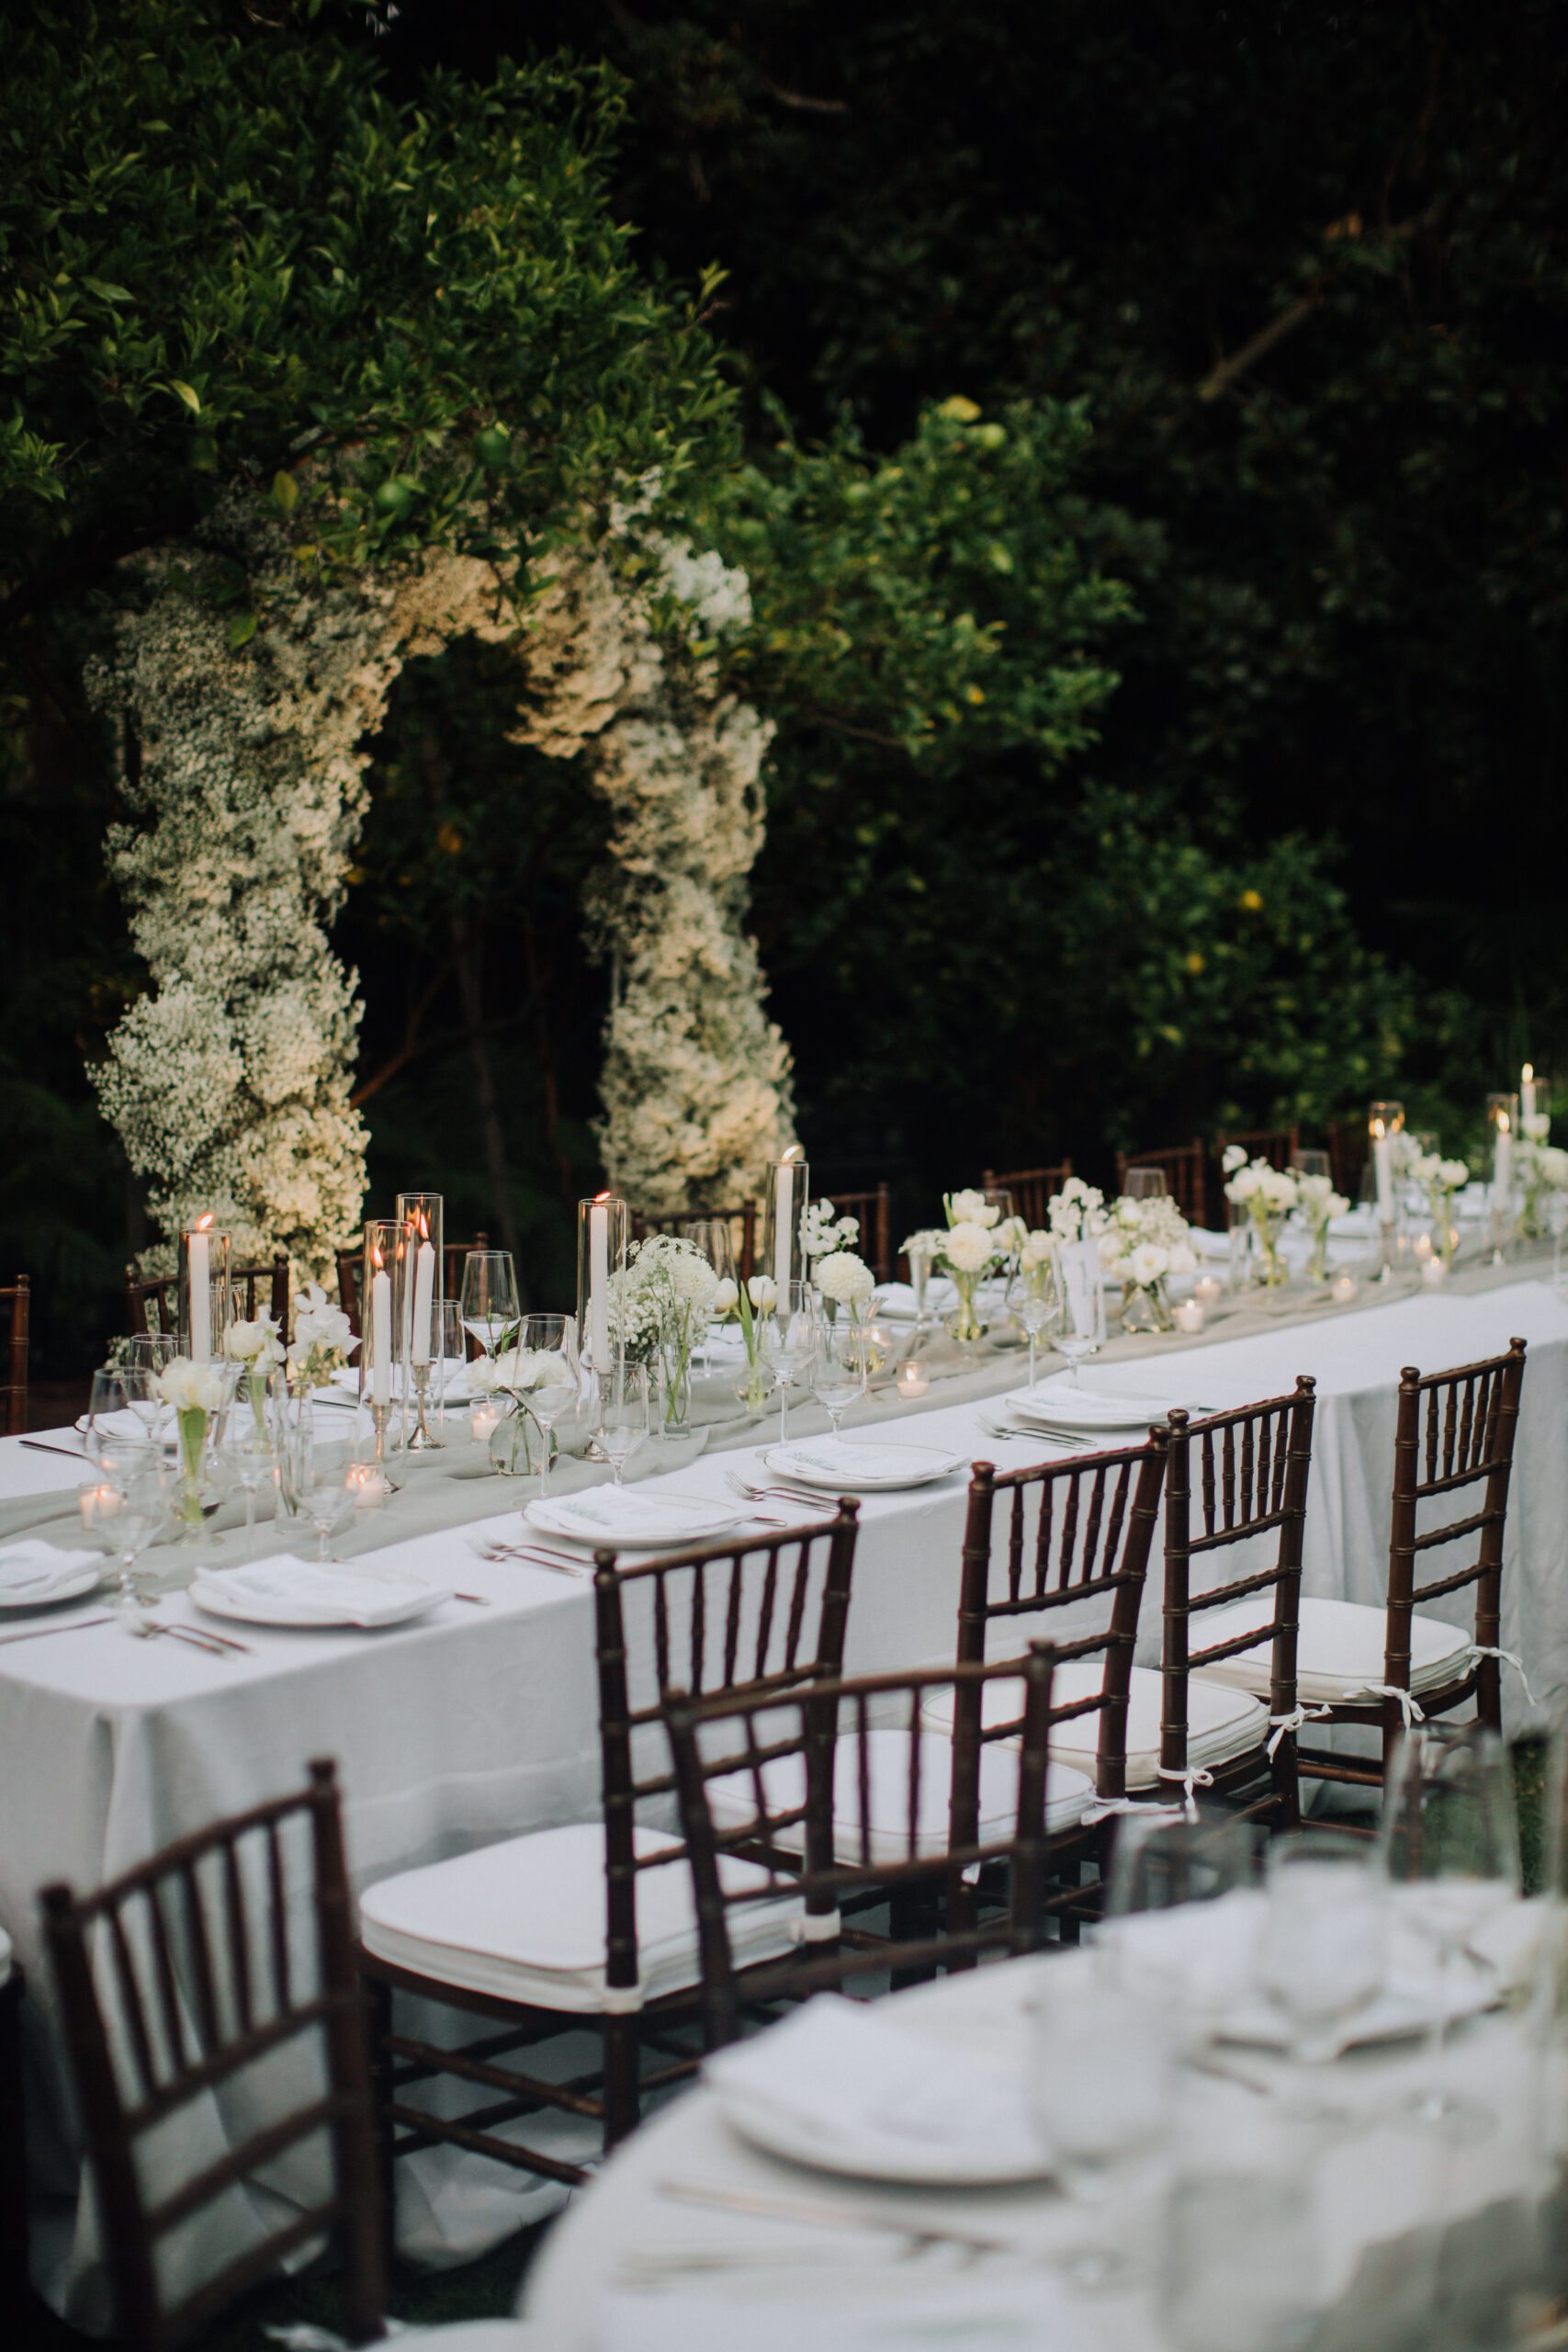 wedding reception sits in the lush garden ready for the guests